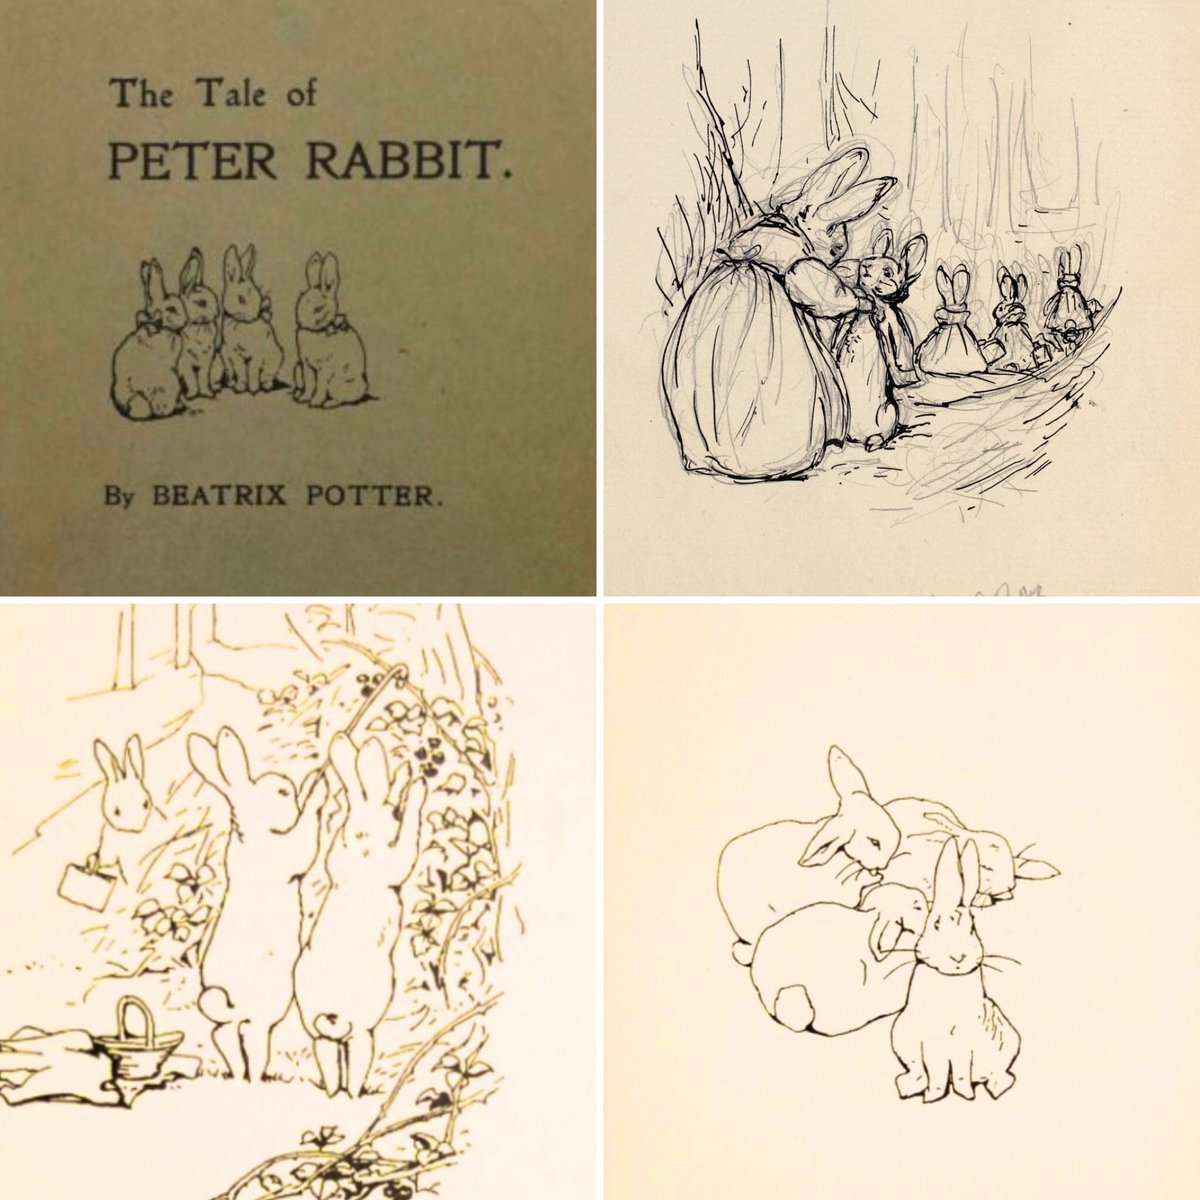 The first edition of The Tale of Peter Rabbit was published privately on 16th Dec 1901, when #BeatrixPotter had 250 copies printed as #Christmas gifts for her family & friends. Sir Arthur Conan Doyle was given a copy for his children. #BookWormSat #BookChatWeekly #OTD